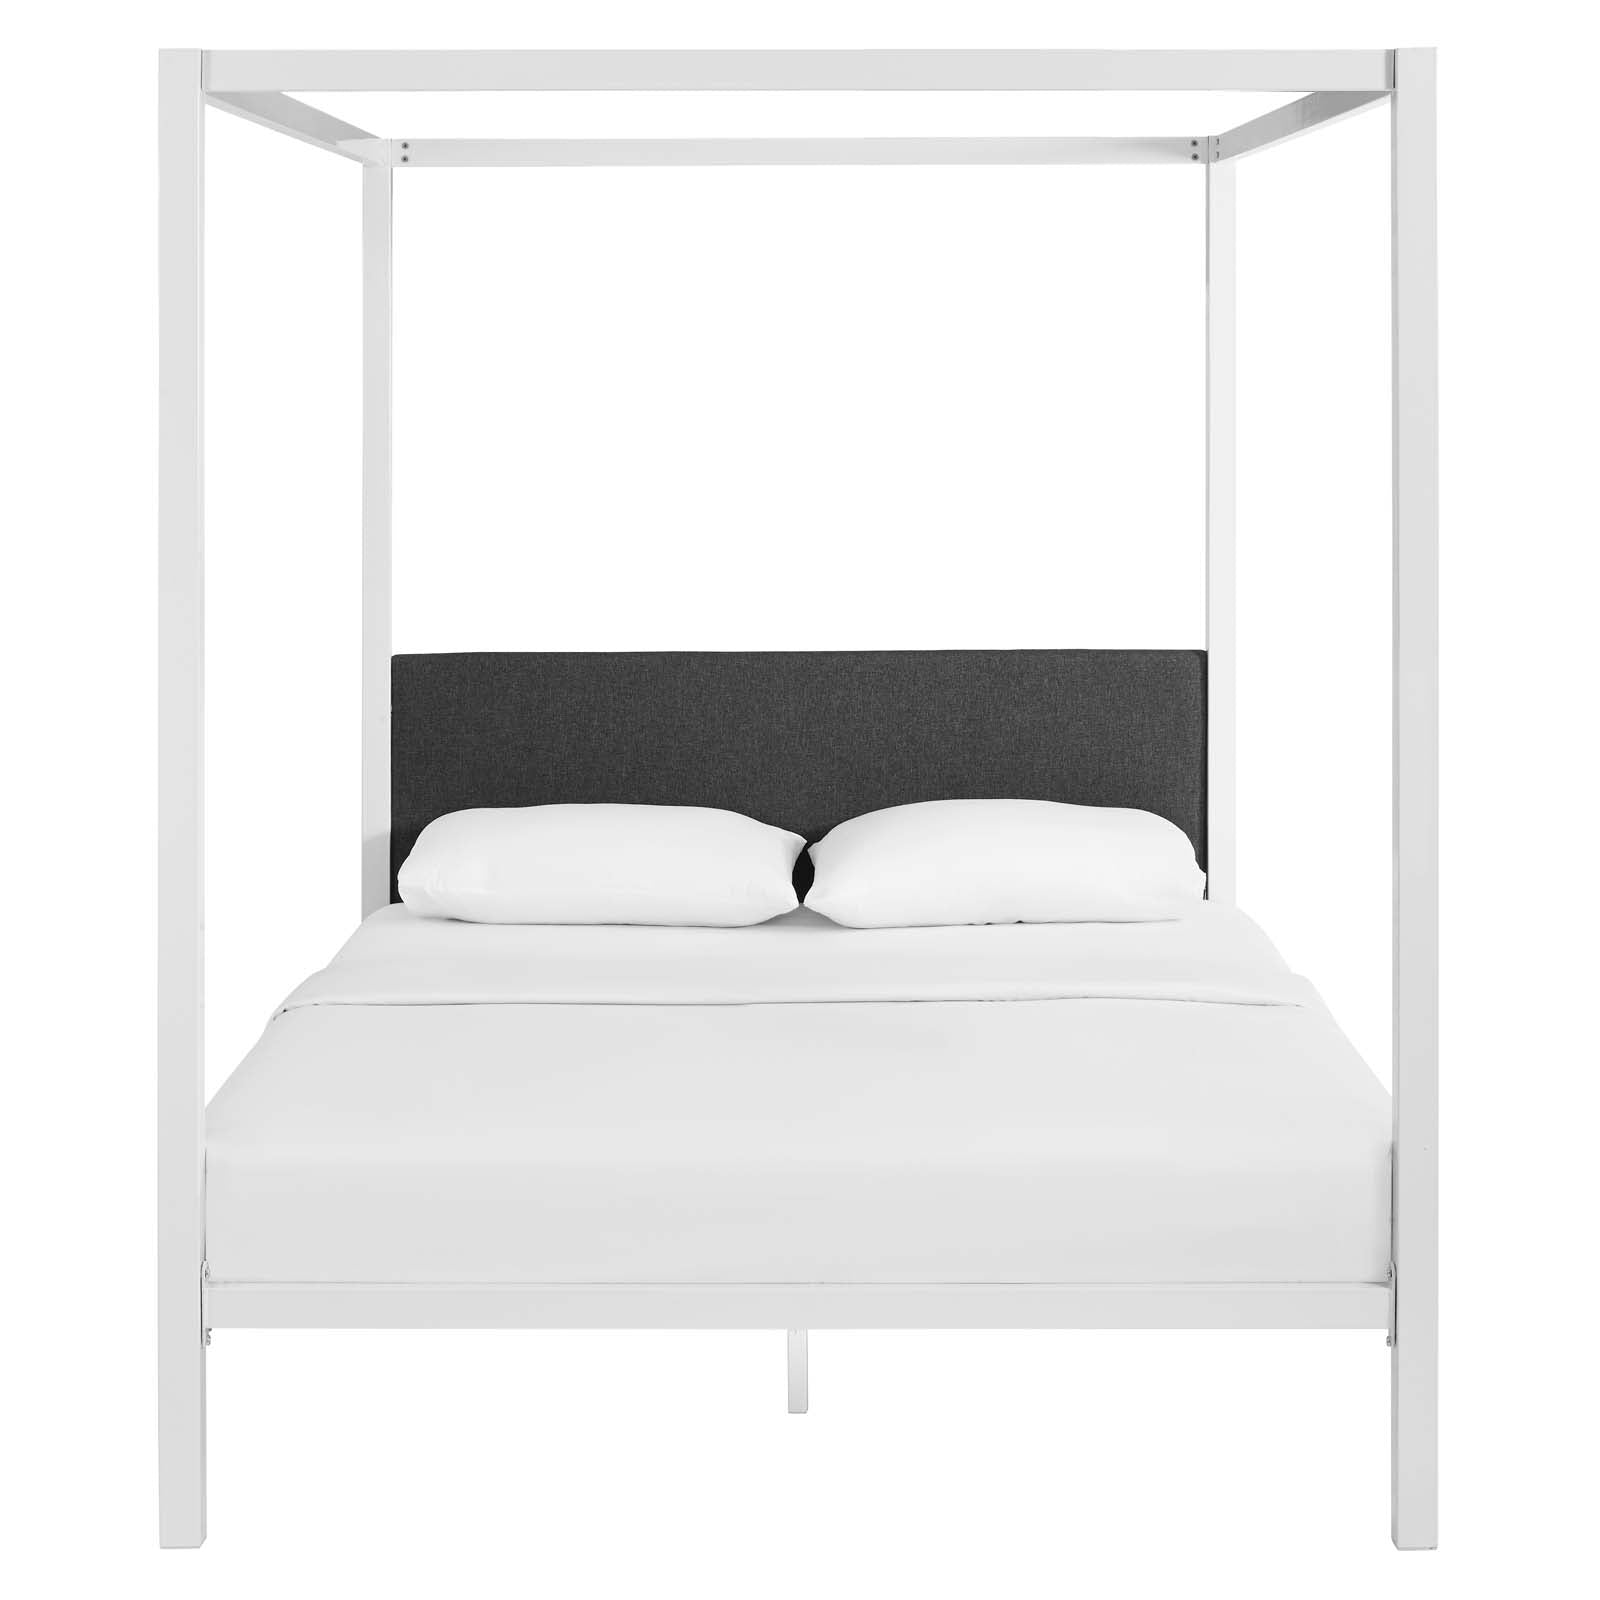 Modway Beds - Raina Queen Canopy Bed Frame White Gray